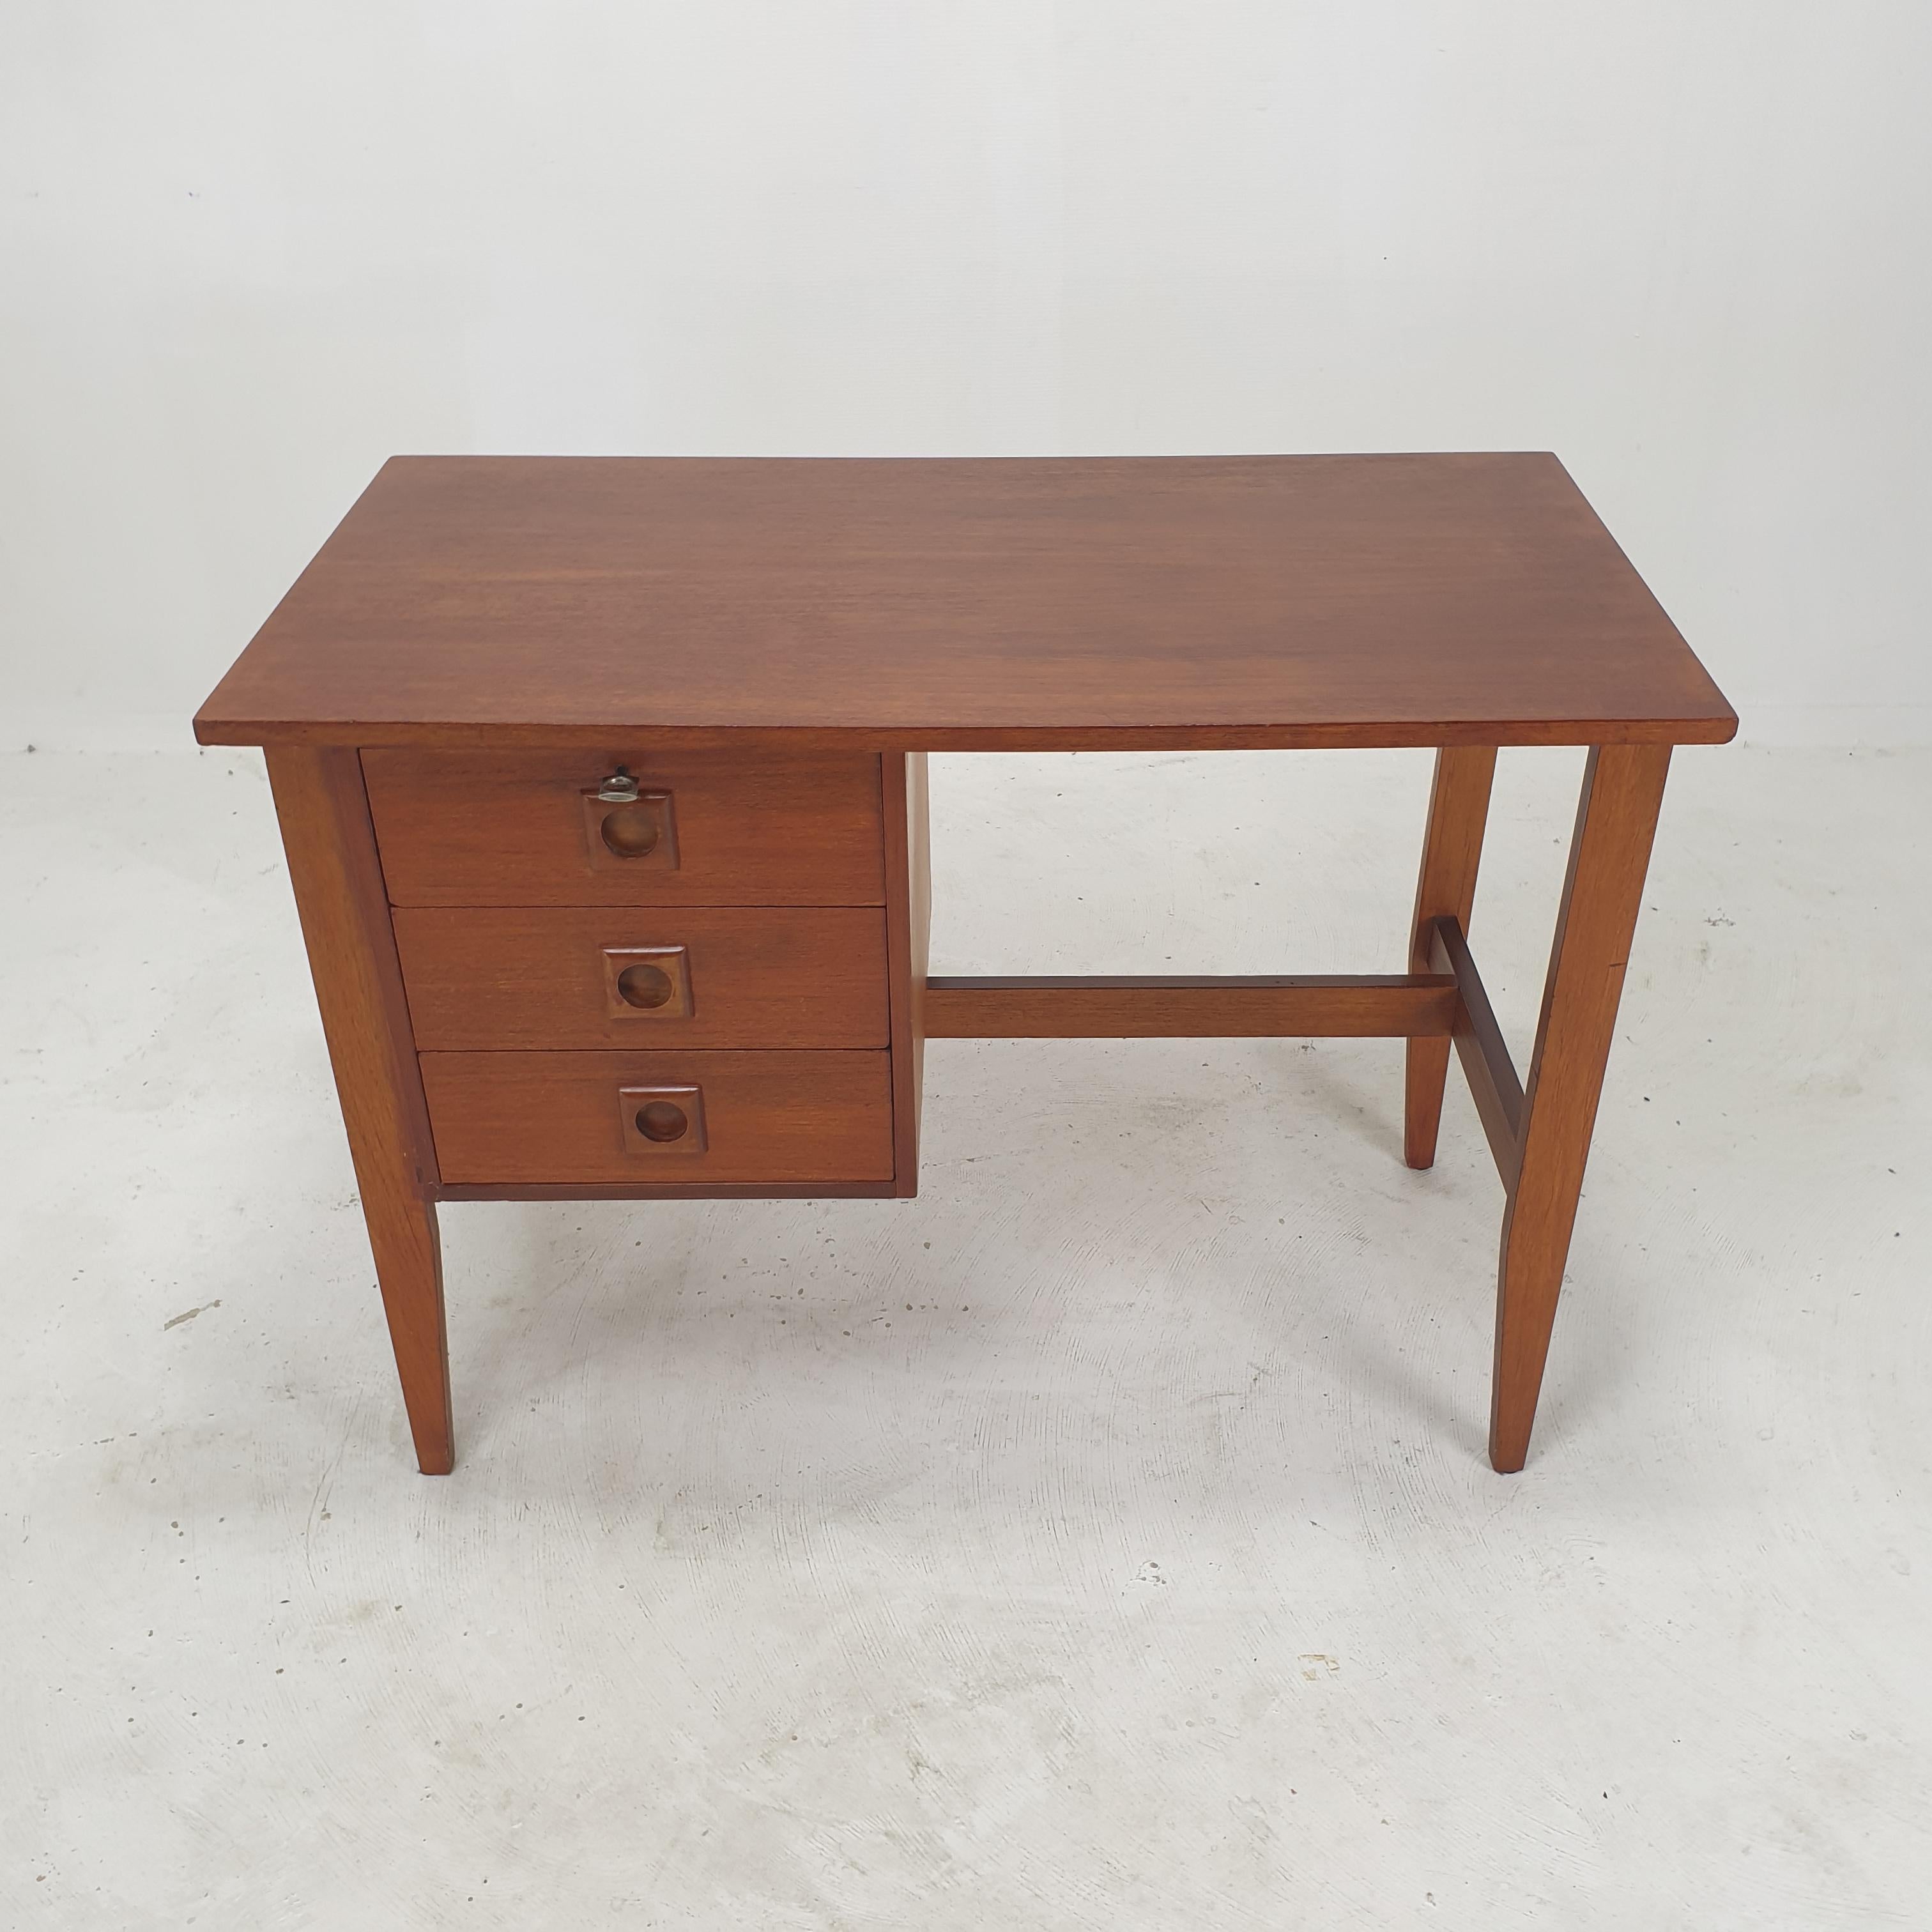 Very nice teak desk, produced in Denmark in the 1970s. 

The desk can be used as free standing thanks to the finished back side.

On the front there are three drawers with the original key.

We work with professional packers and shippers, we